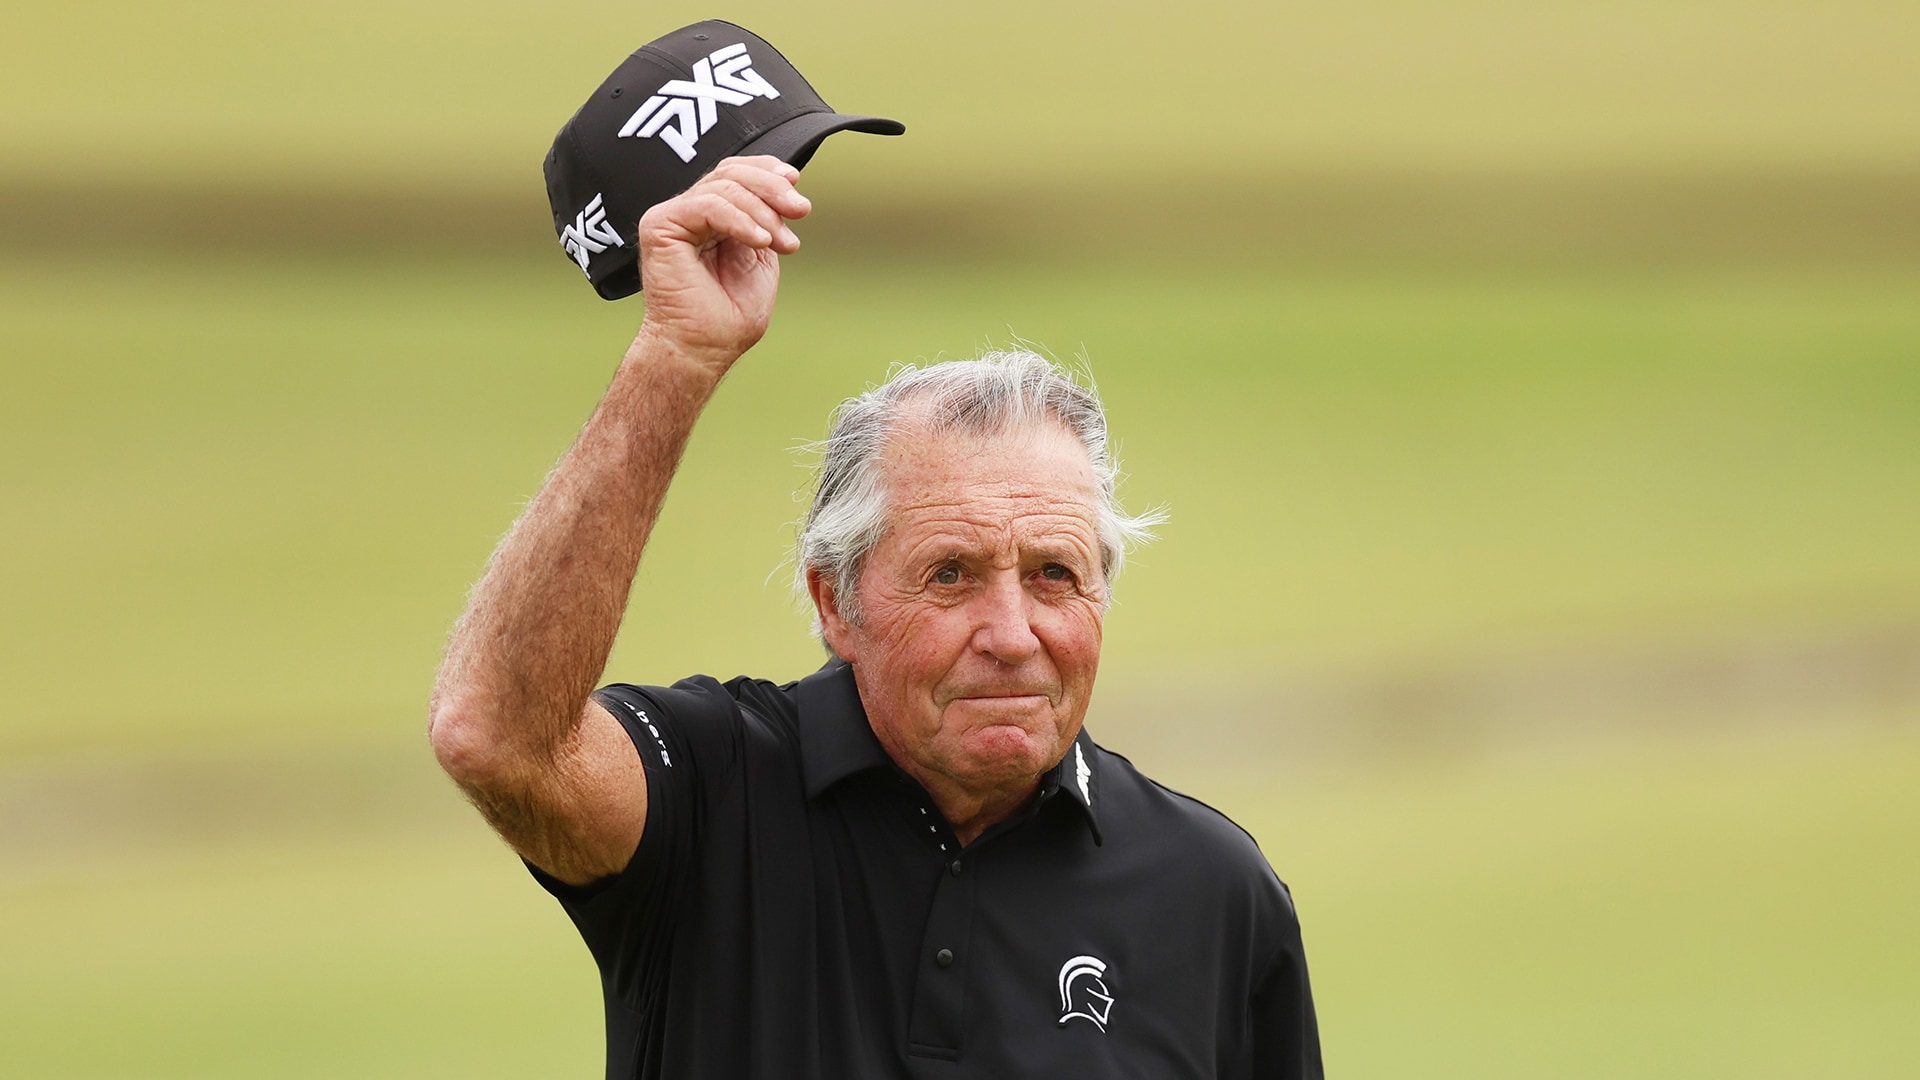 A ‘wonderful’ opportunity: When it comes to LIV, Gary Player changes tune again